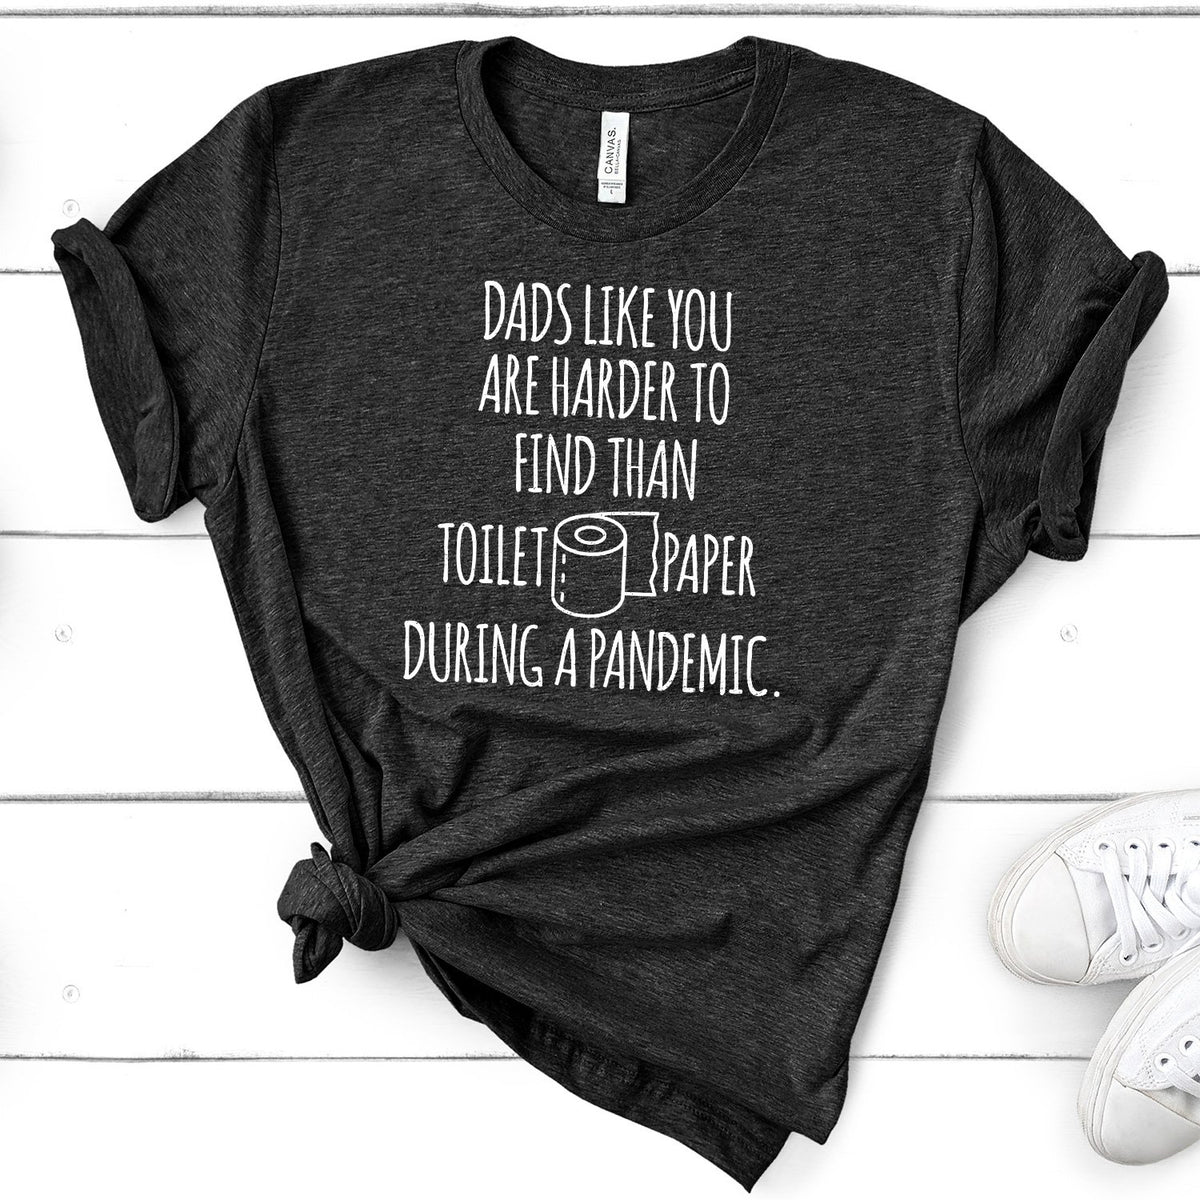 Dads Like You Are Harder to Find Than Toilet Paper During A Pandemic - Short Sleeve Tee Shirt